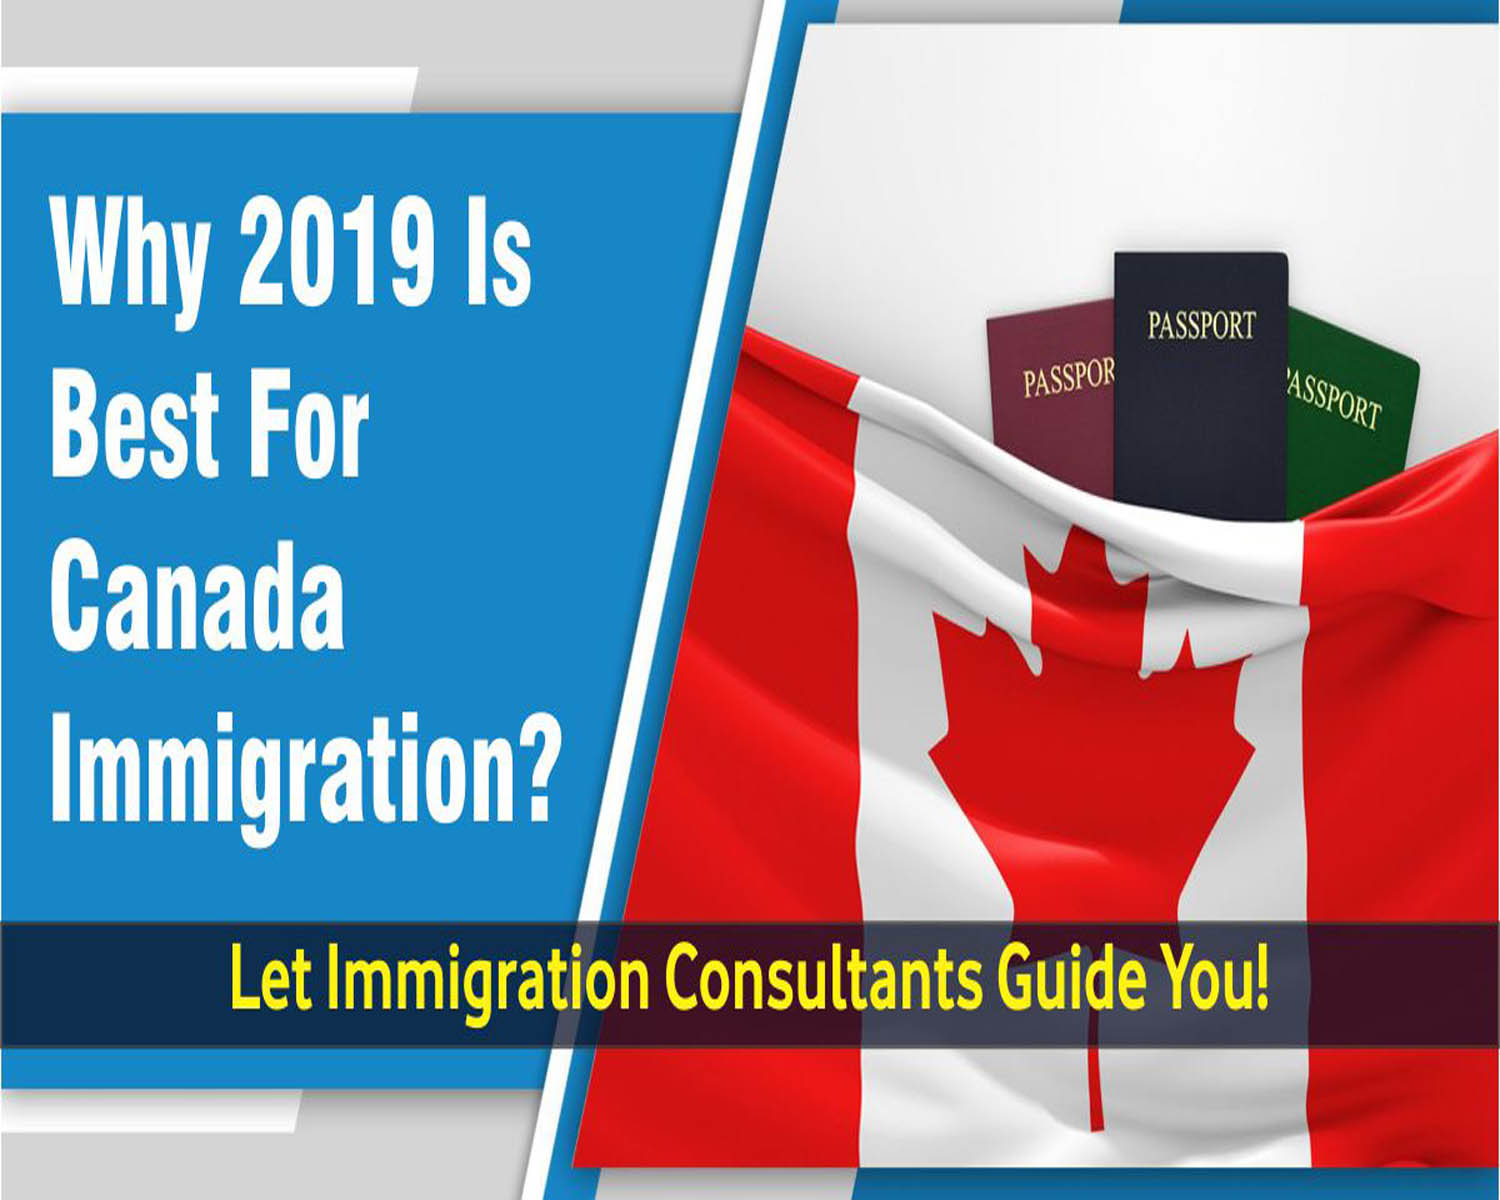 Immigration Consultants and Assistance- Is it a great idea?